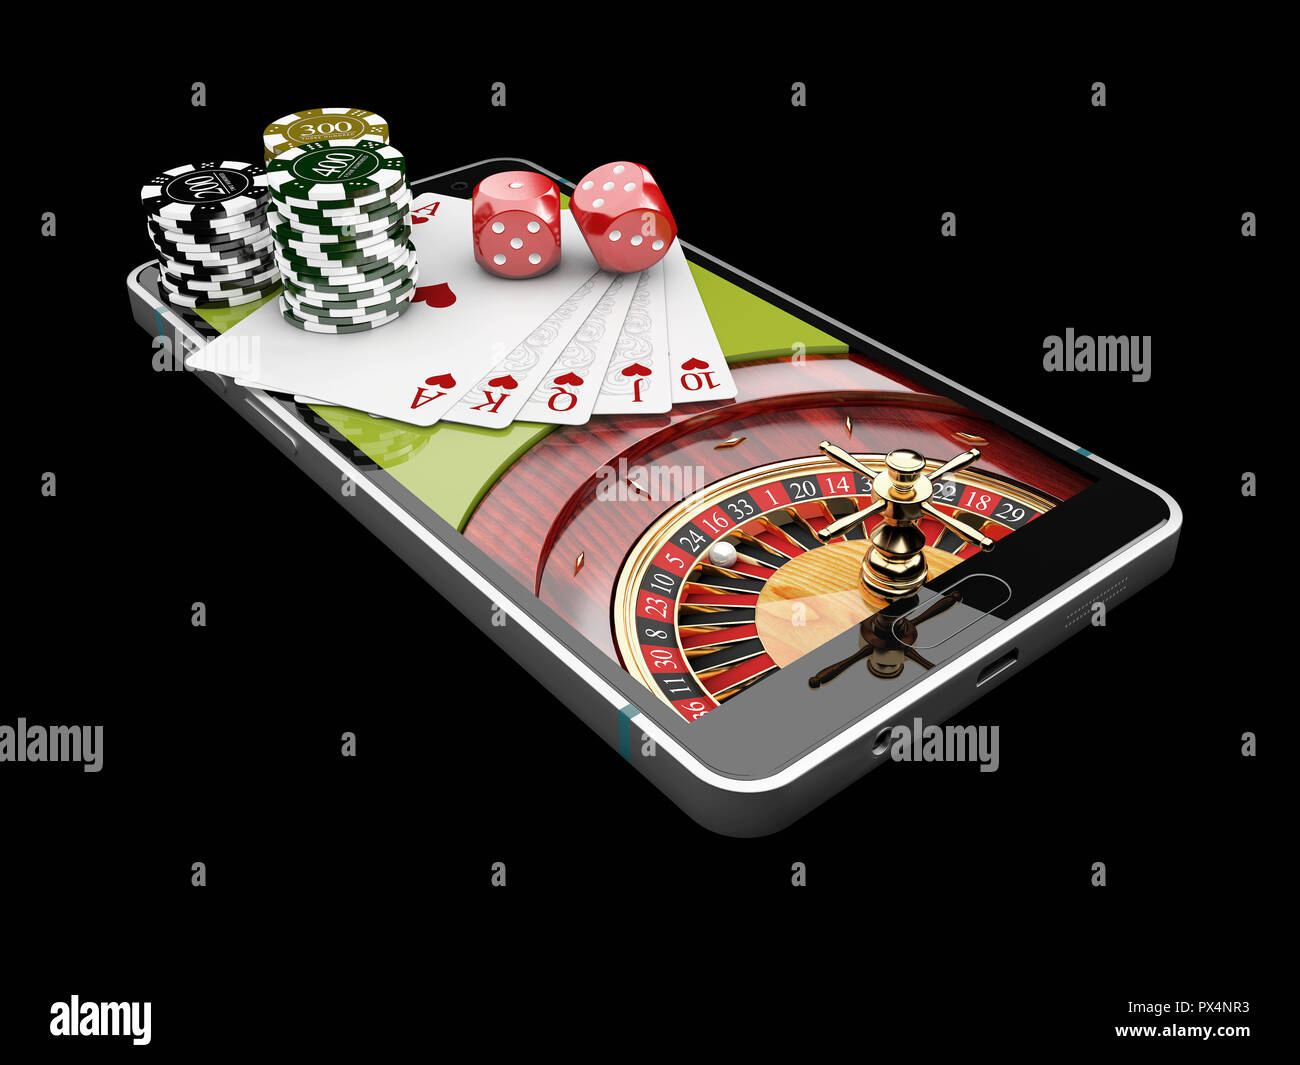 Schelden sarcoom draadloze Online Internet casino app,poker cards with dice and casino chips on the  phone 3d illustration Stock Photo - Alamy